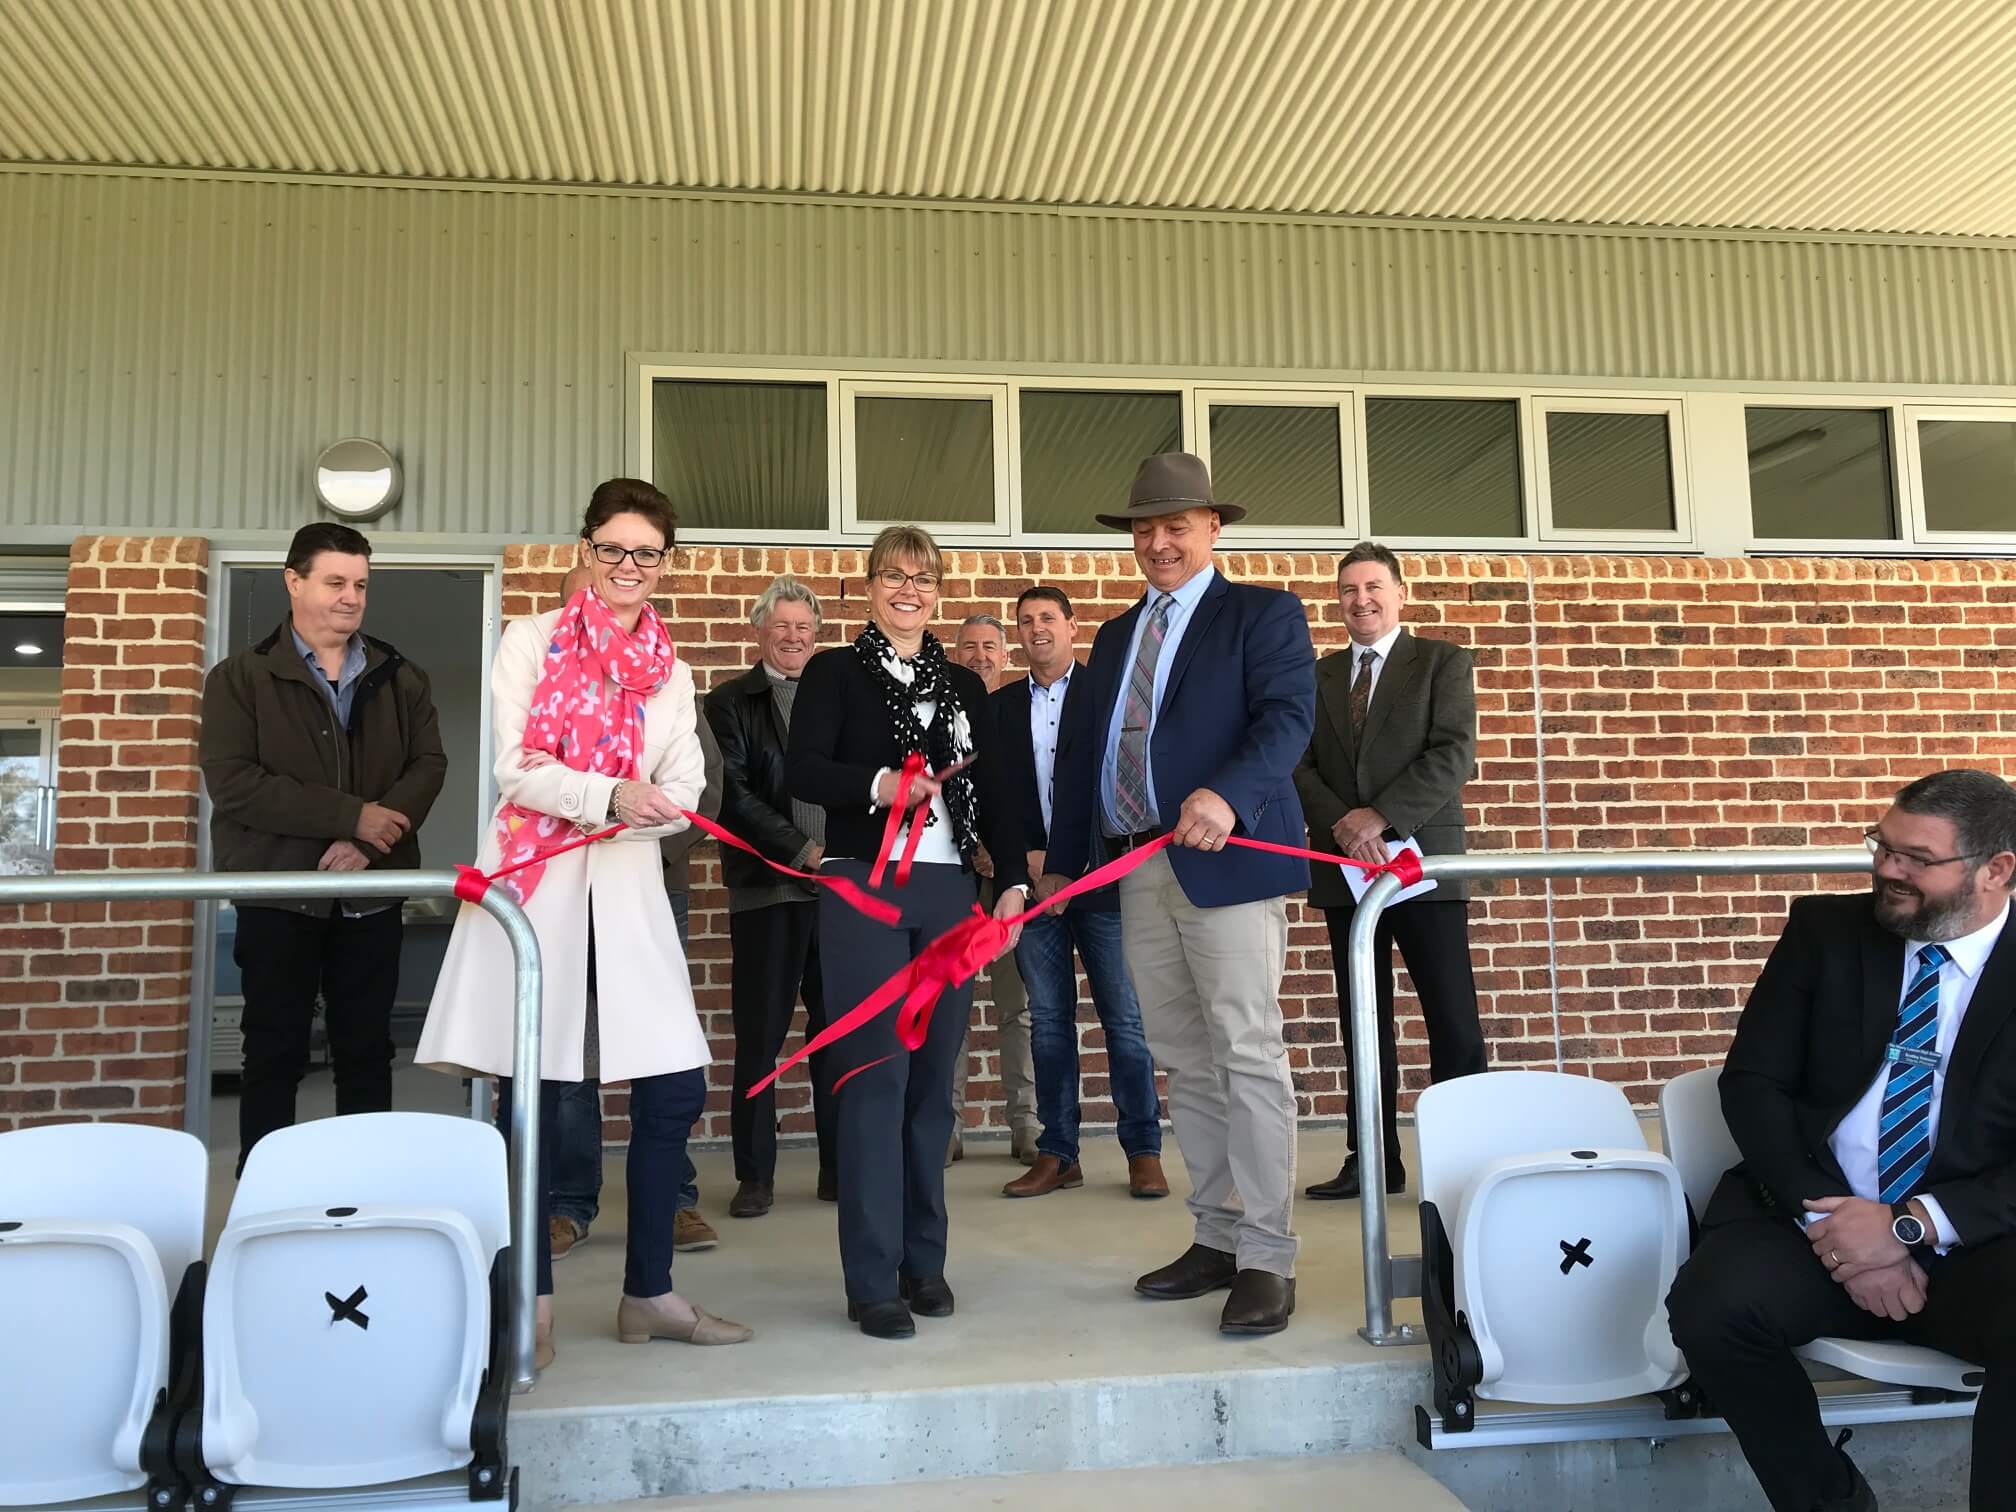 Steph Cooke, Mayor Mark Liebich and others cut a red ribbon to open the grandstand.